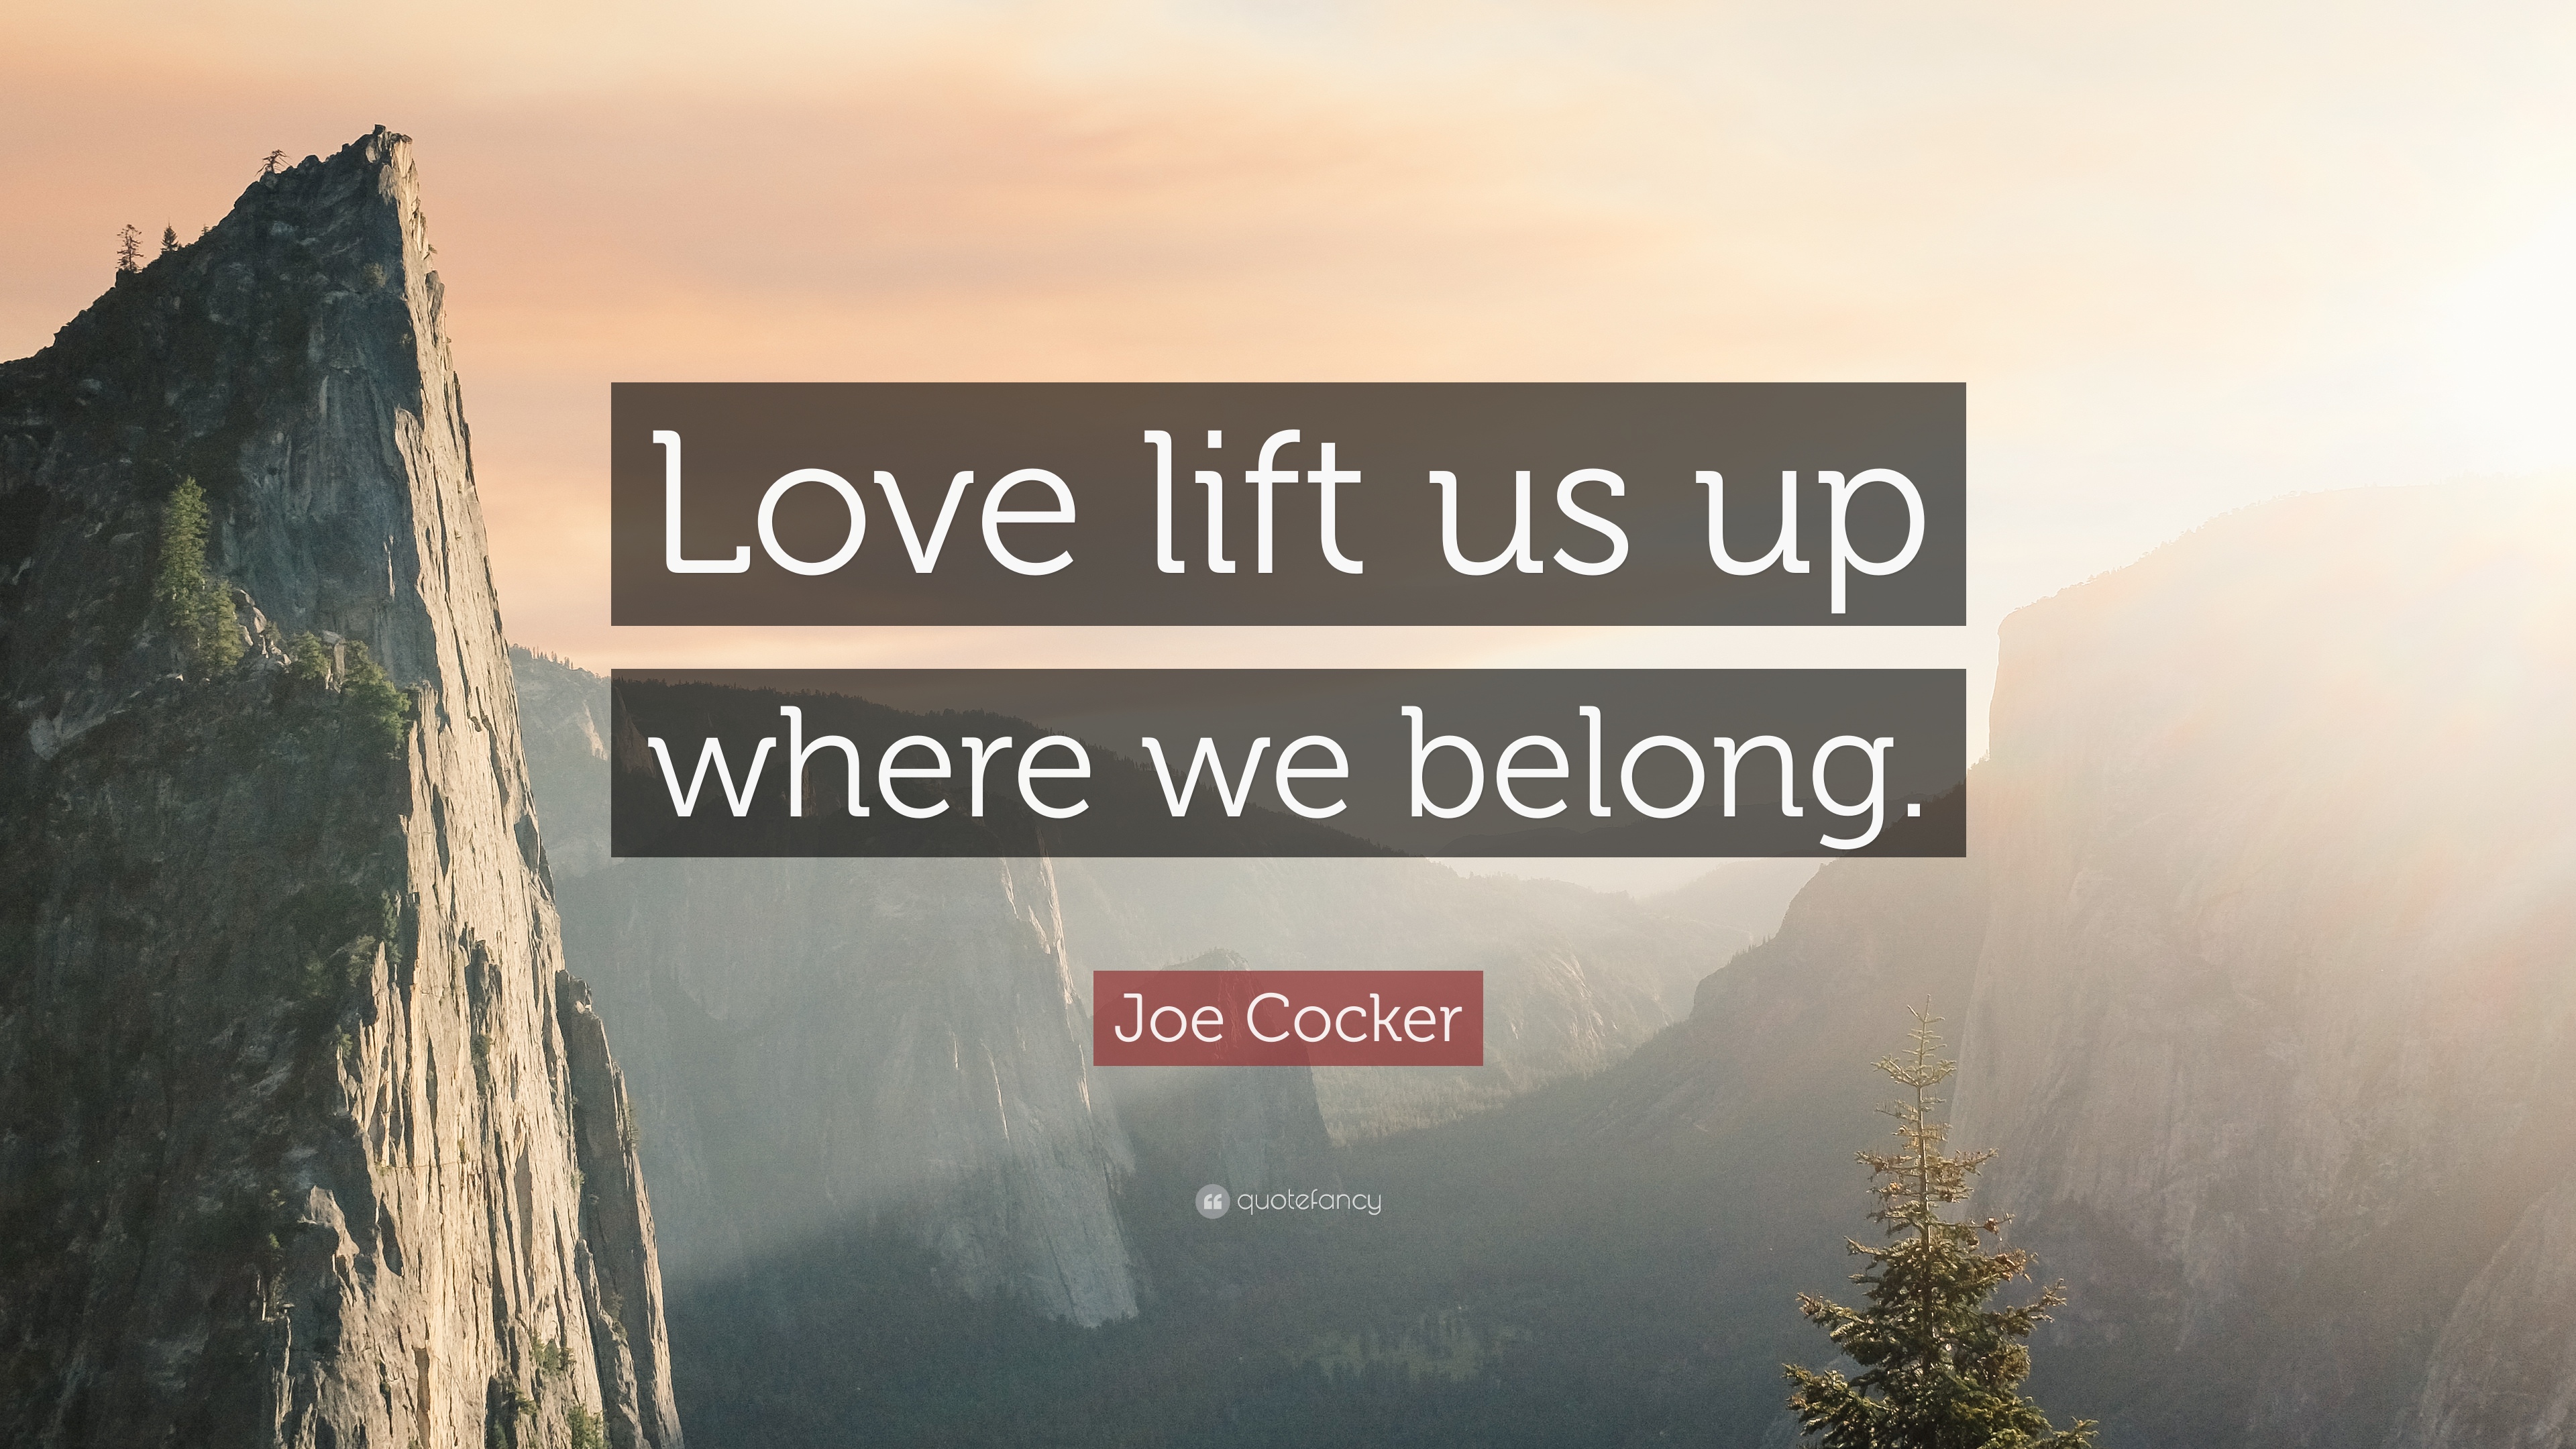 5 Joe Cocker Quotes About Love